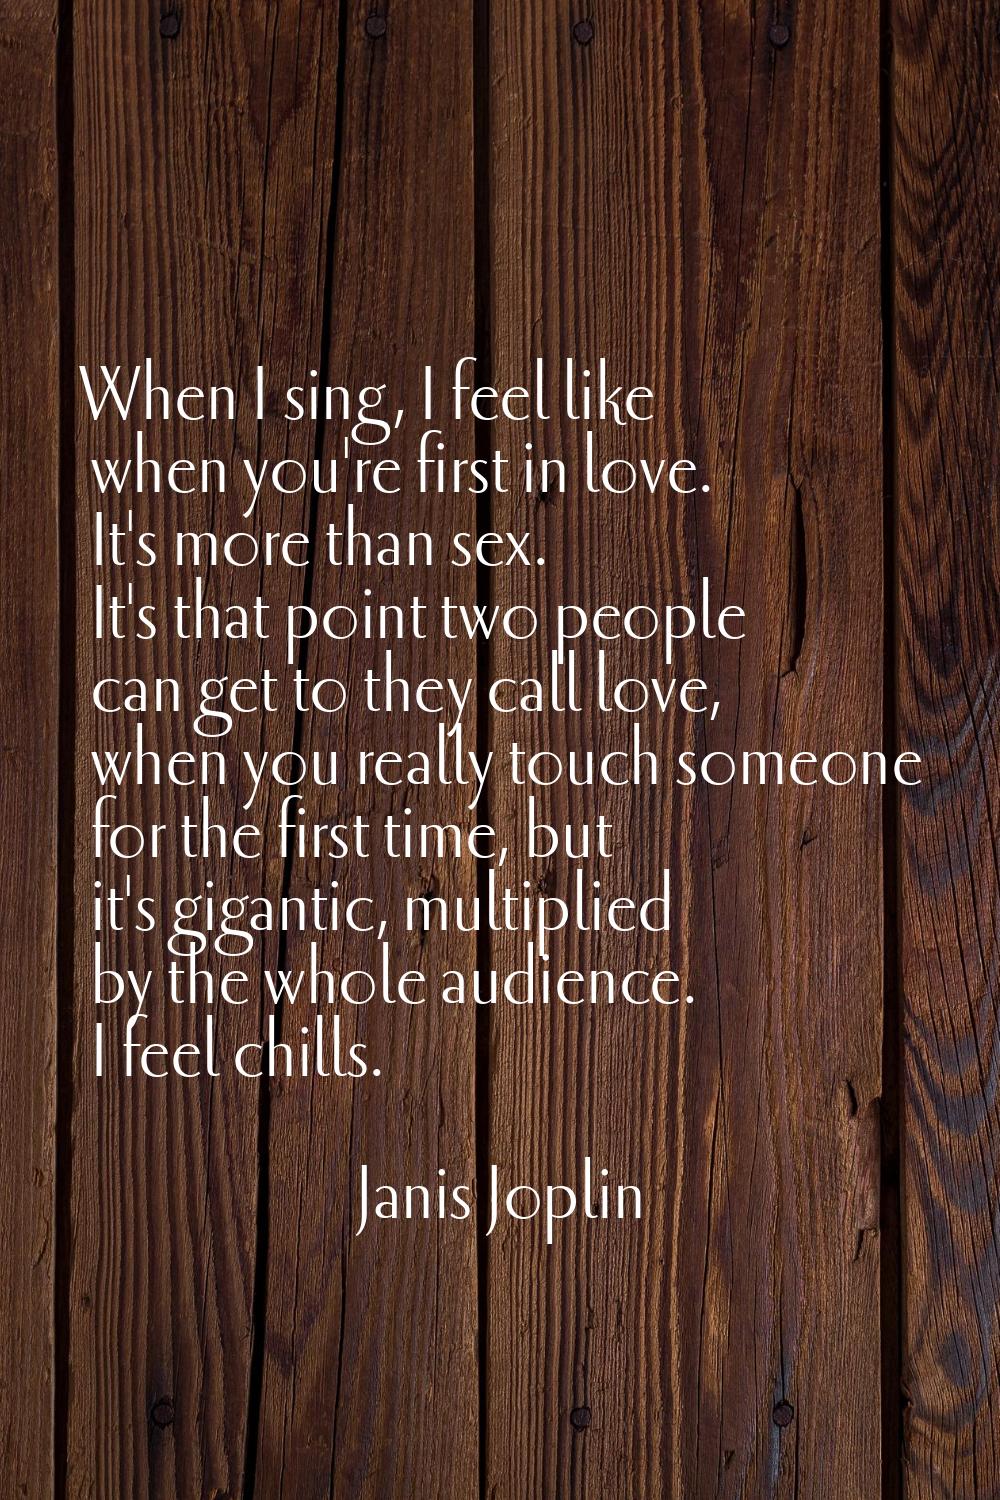 When I sing, I feel like when you're first in love. It's more than sex. It's that point two people 